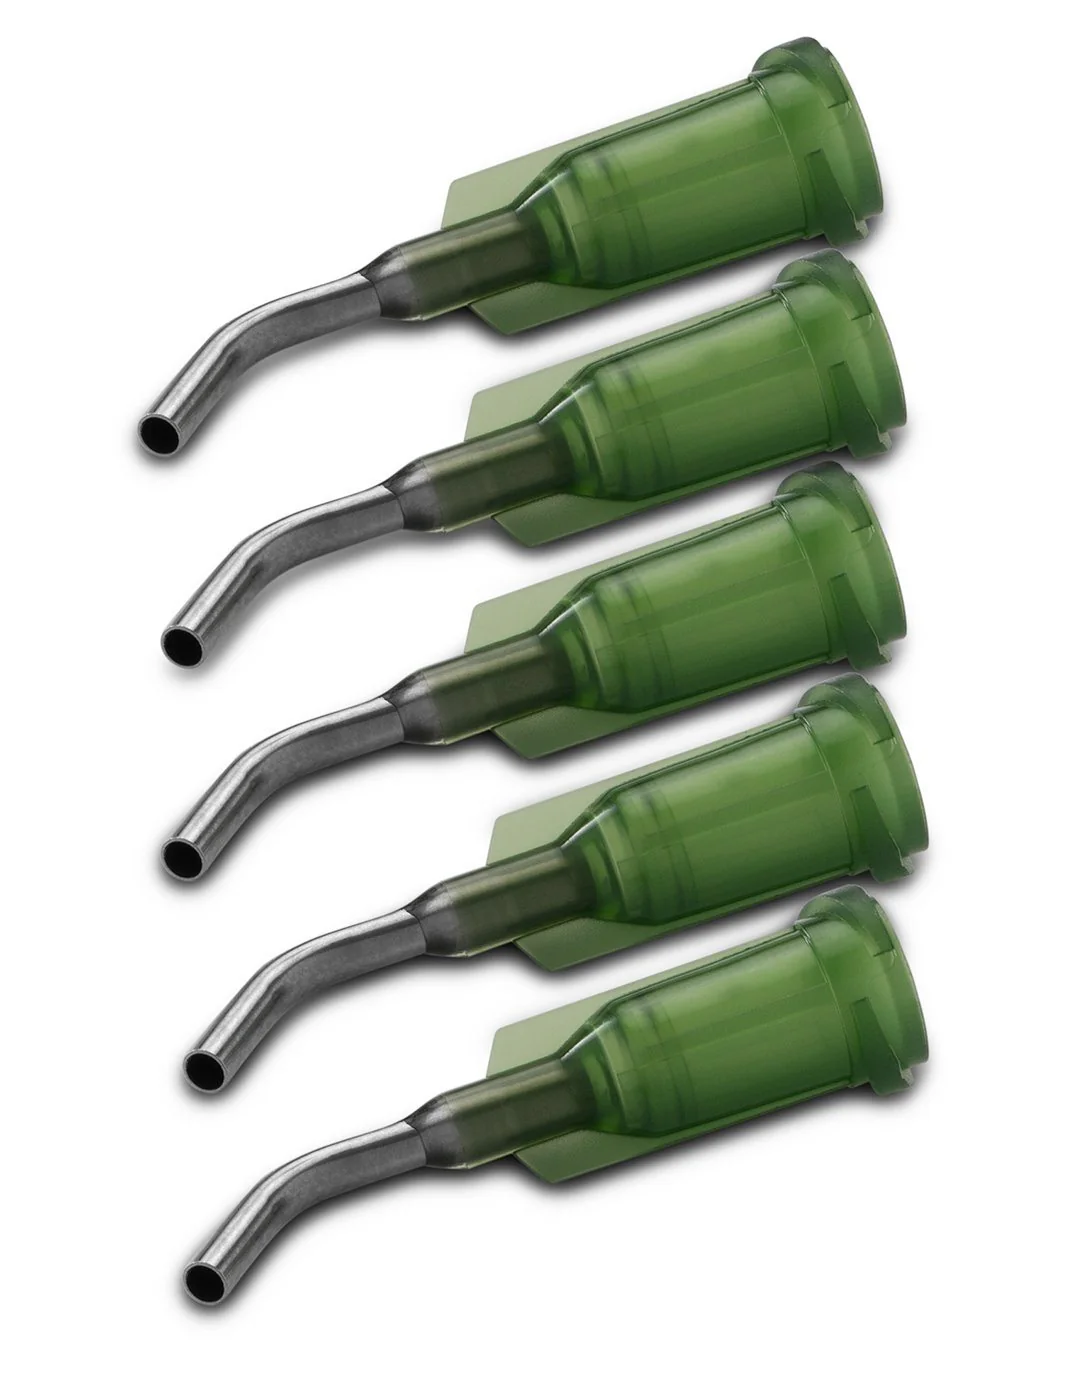 Replacement Luer-Lok Dosing Tips for Lab Dosing Guns - 5 Pack Questions & Answers